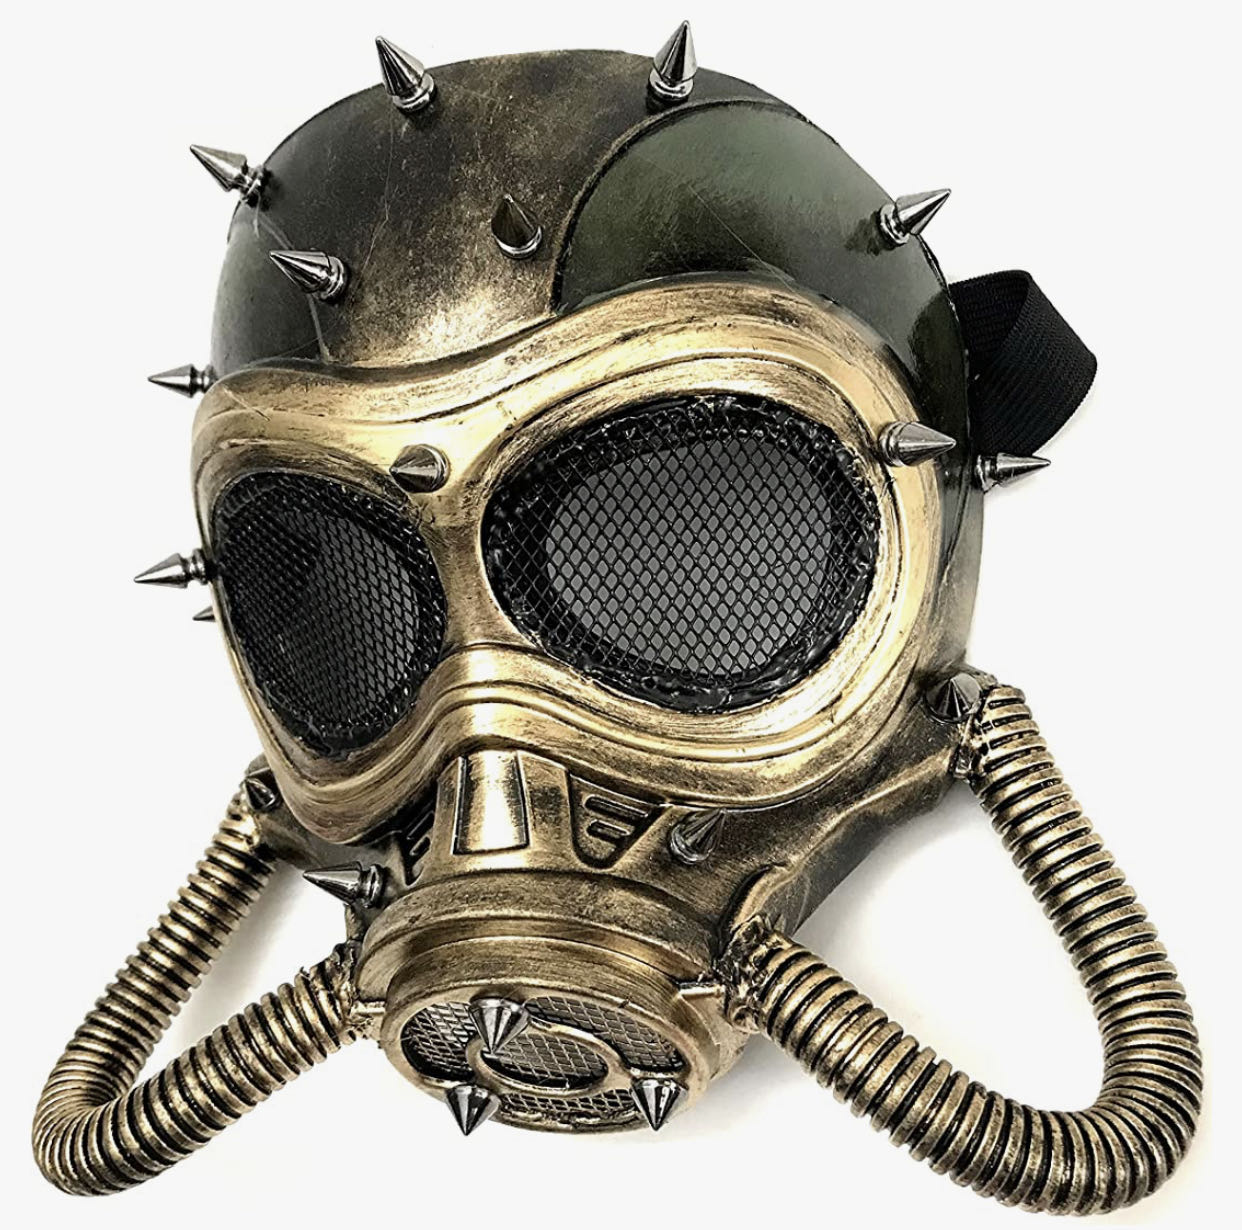 Unisex Full Face Mouth Gas Mask Halloween Costume Cosplay Steampunk Party Brass Green Gold Masquerade Gas Mask